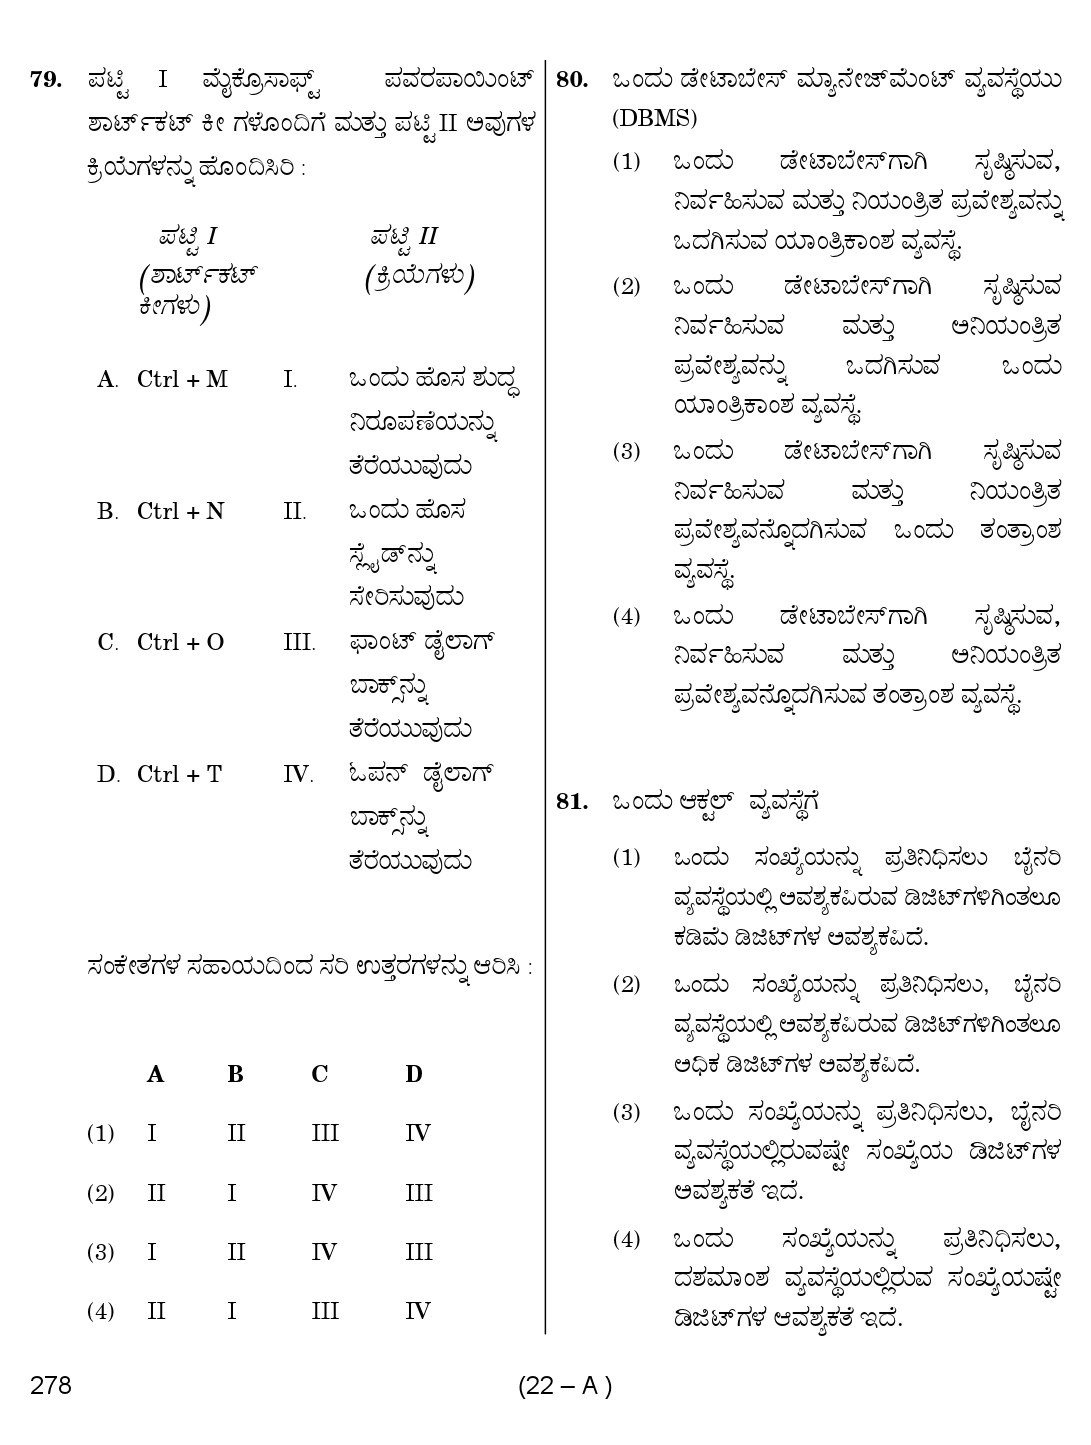 Karnataka PSC First Division Computer Assistants Exam Sample Question Paper 278 22